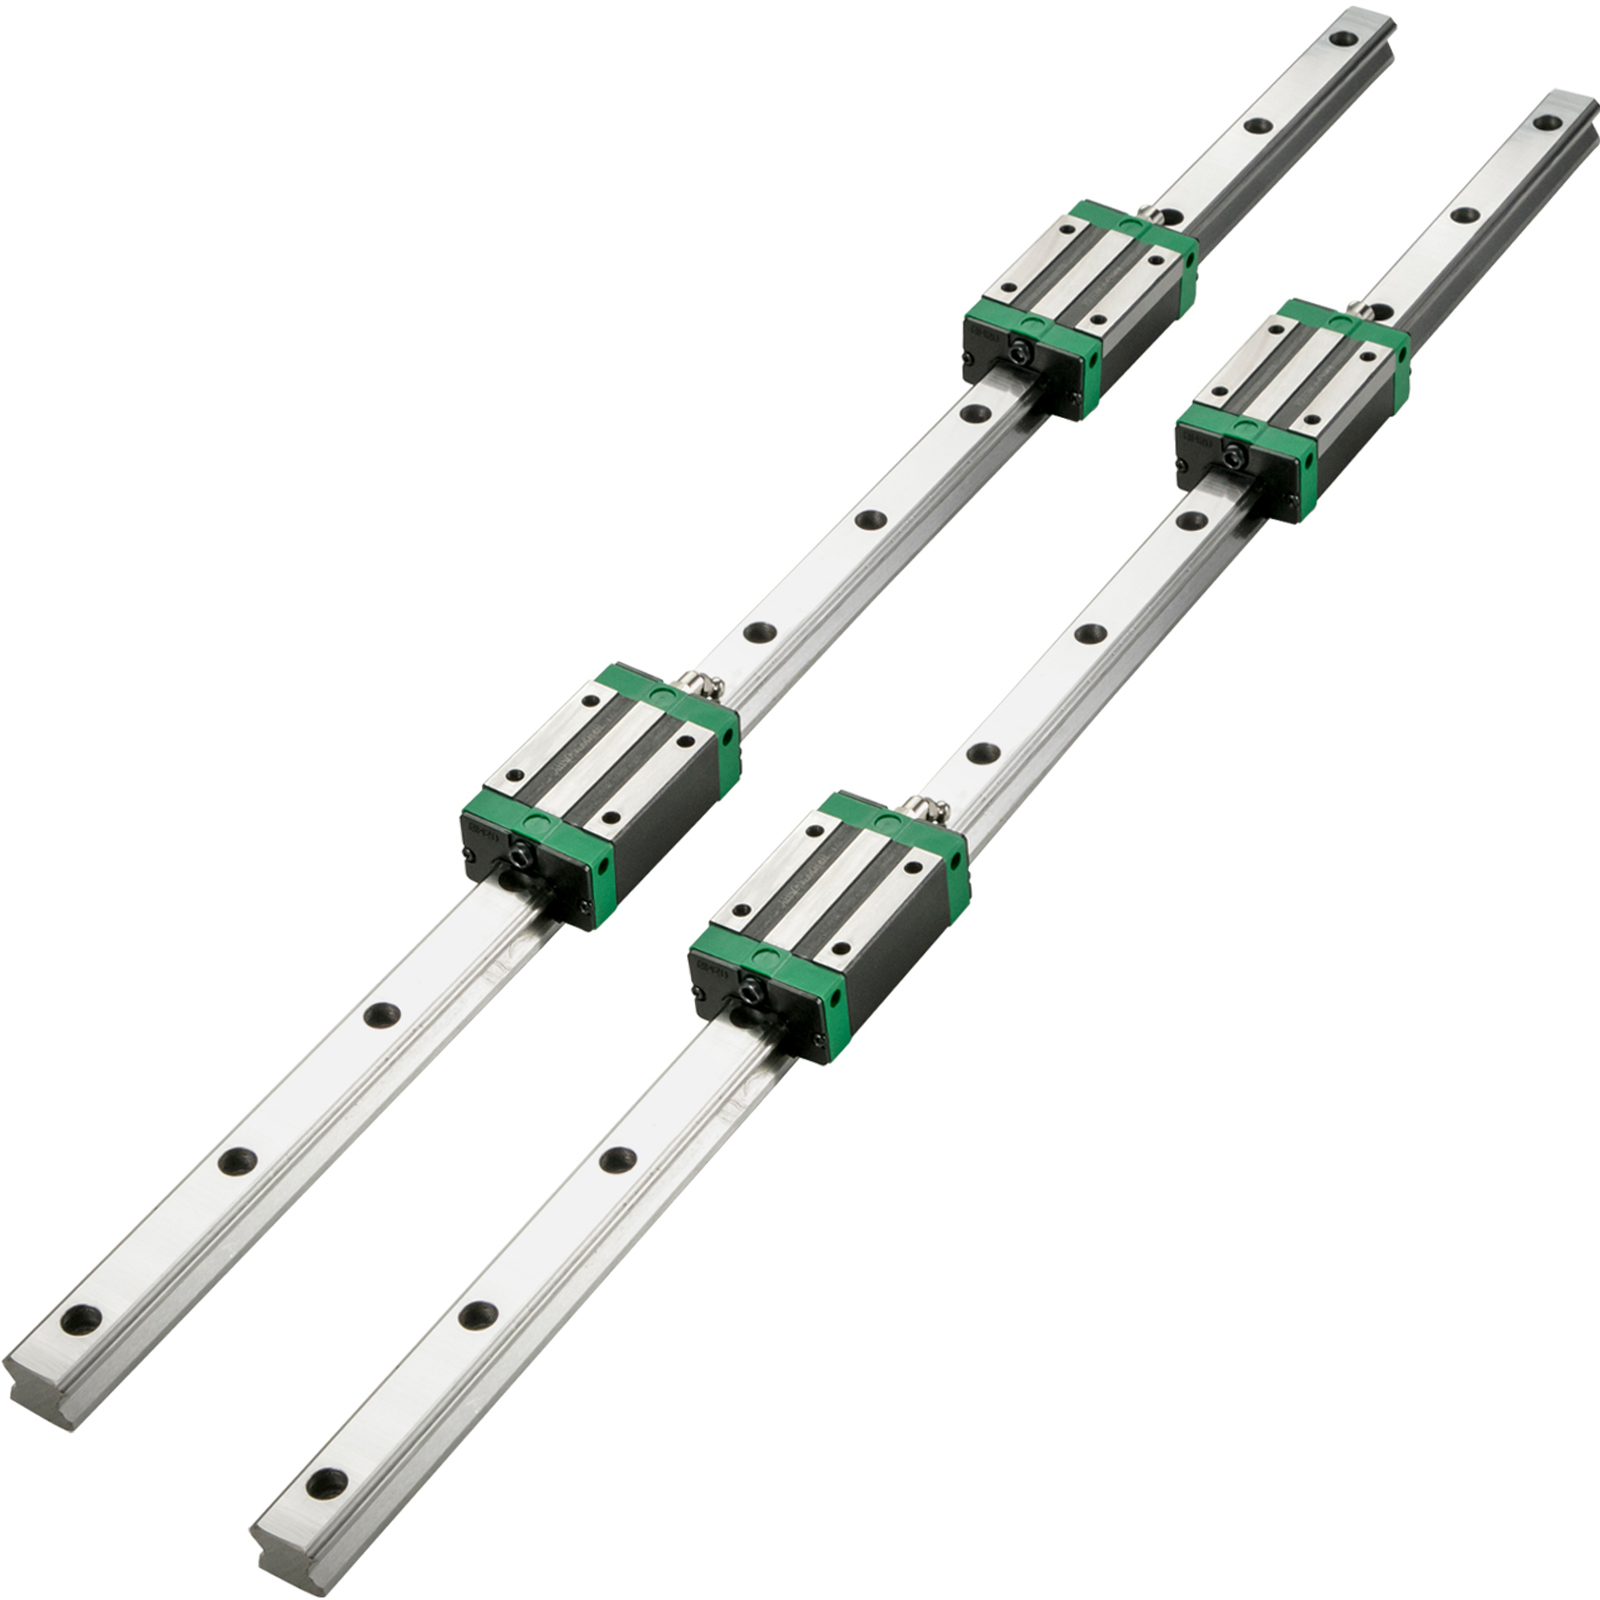 GUWANJI Linear Rail 20-800mm 2 X Linear Slide Rail with 4 X Pillow Block Carriage Bearing Block Linear Rail Support for Automated Machines and Equipments